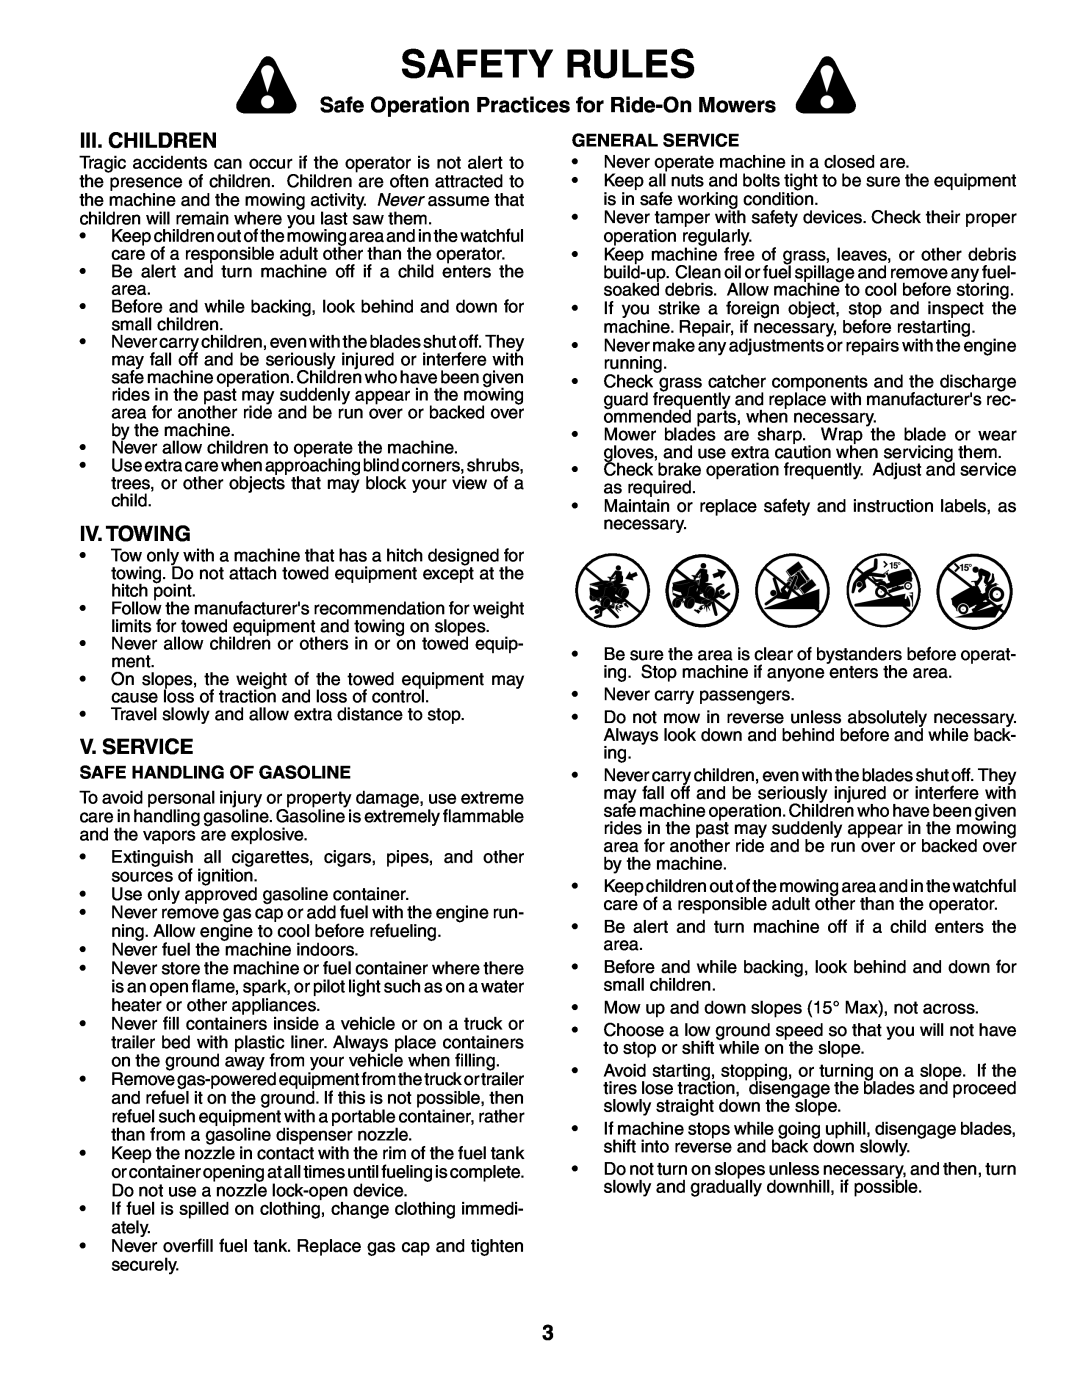 Poulan PK1942LT manual Iii. Children, Iv. Towing, V. Service, Safety Rules, Safe Operation Practices for Ride-OnMowers 